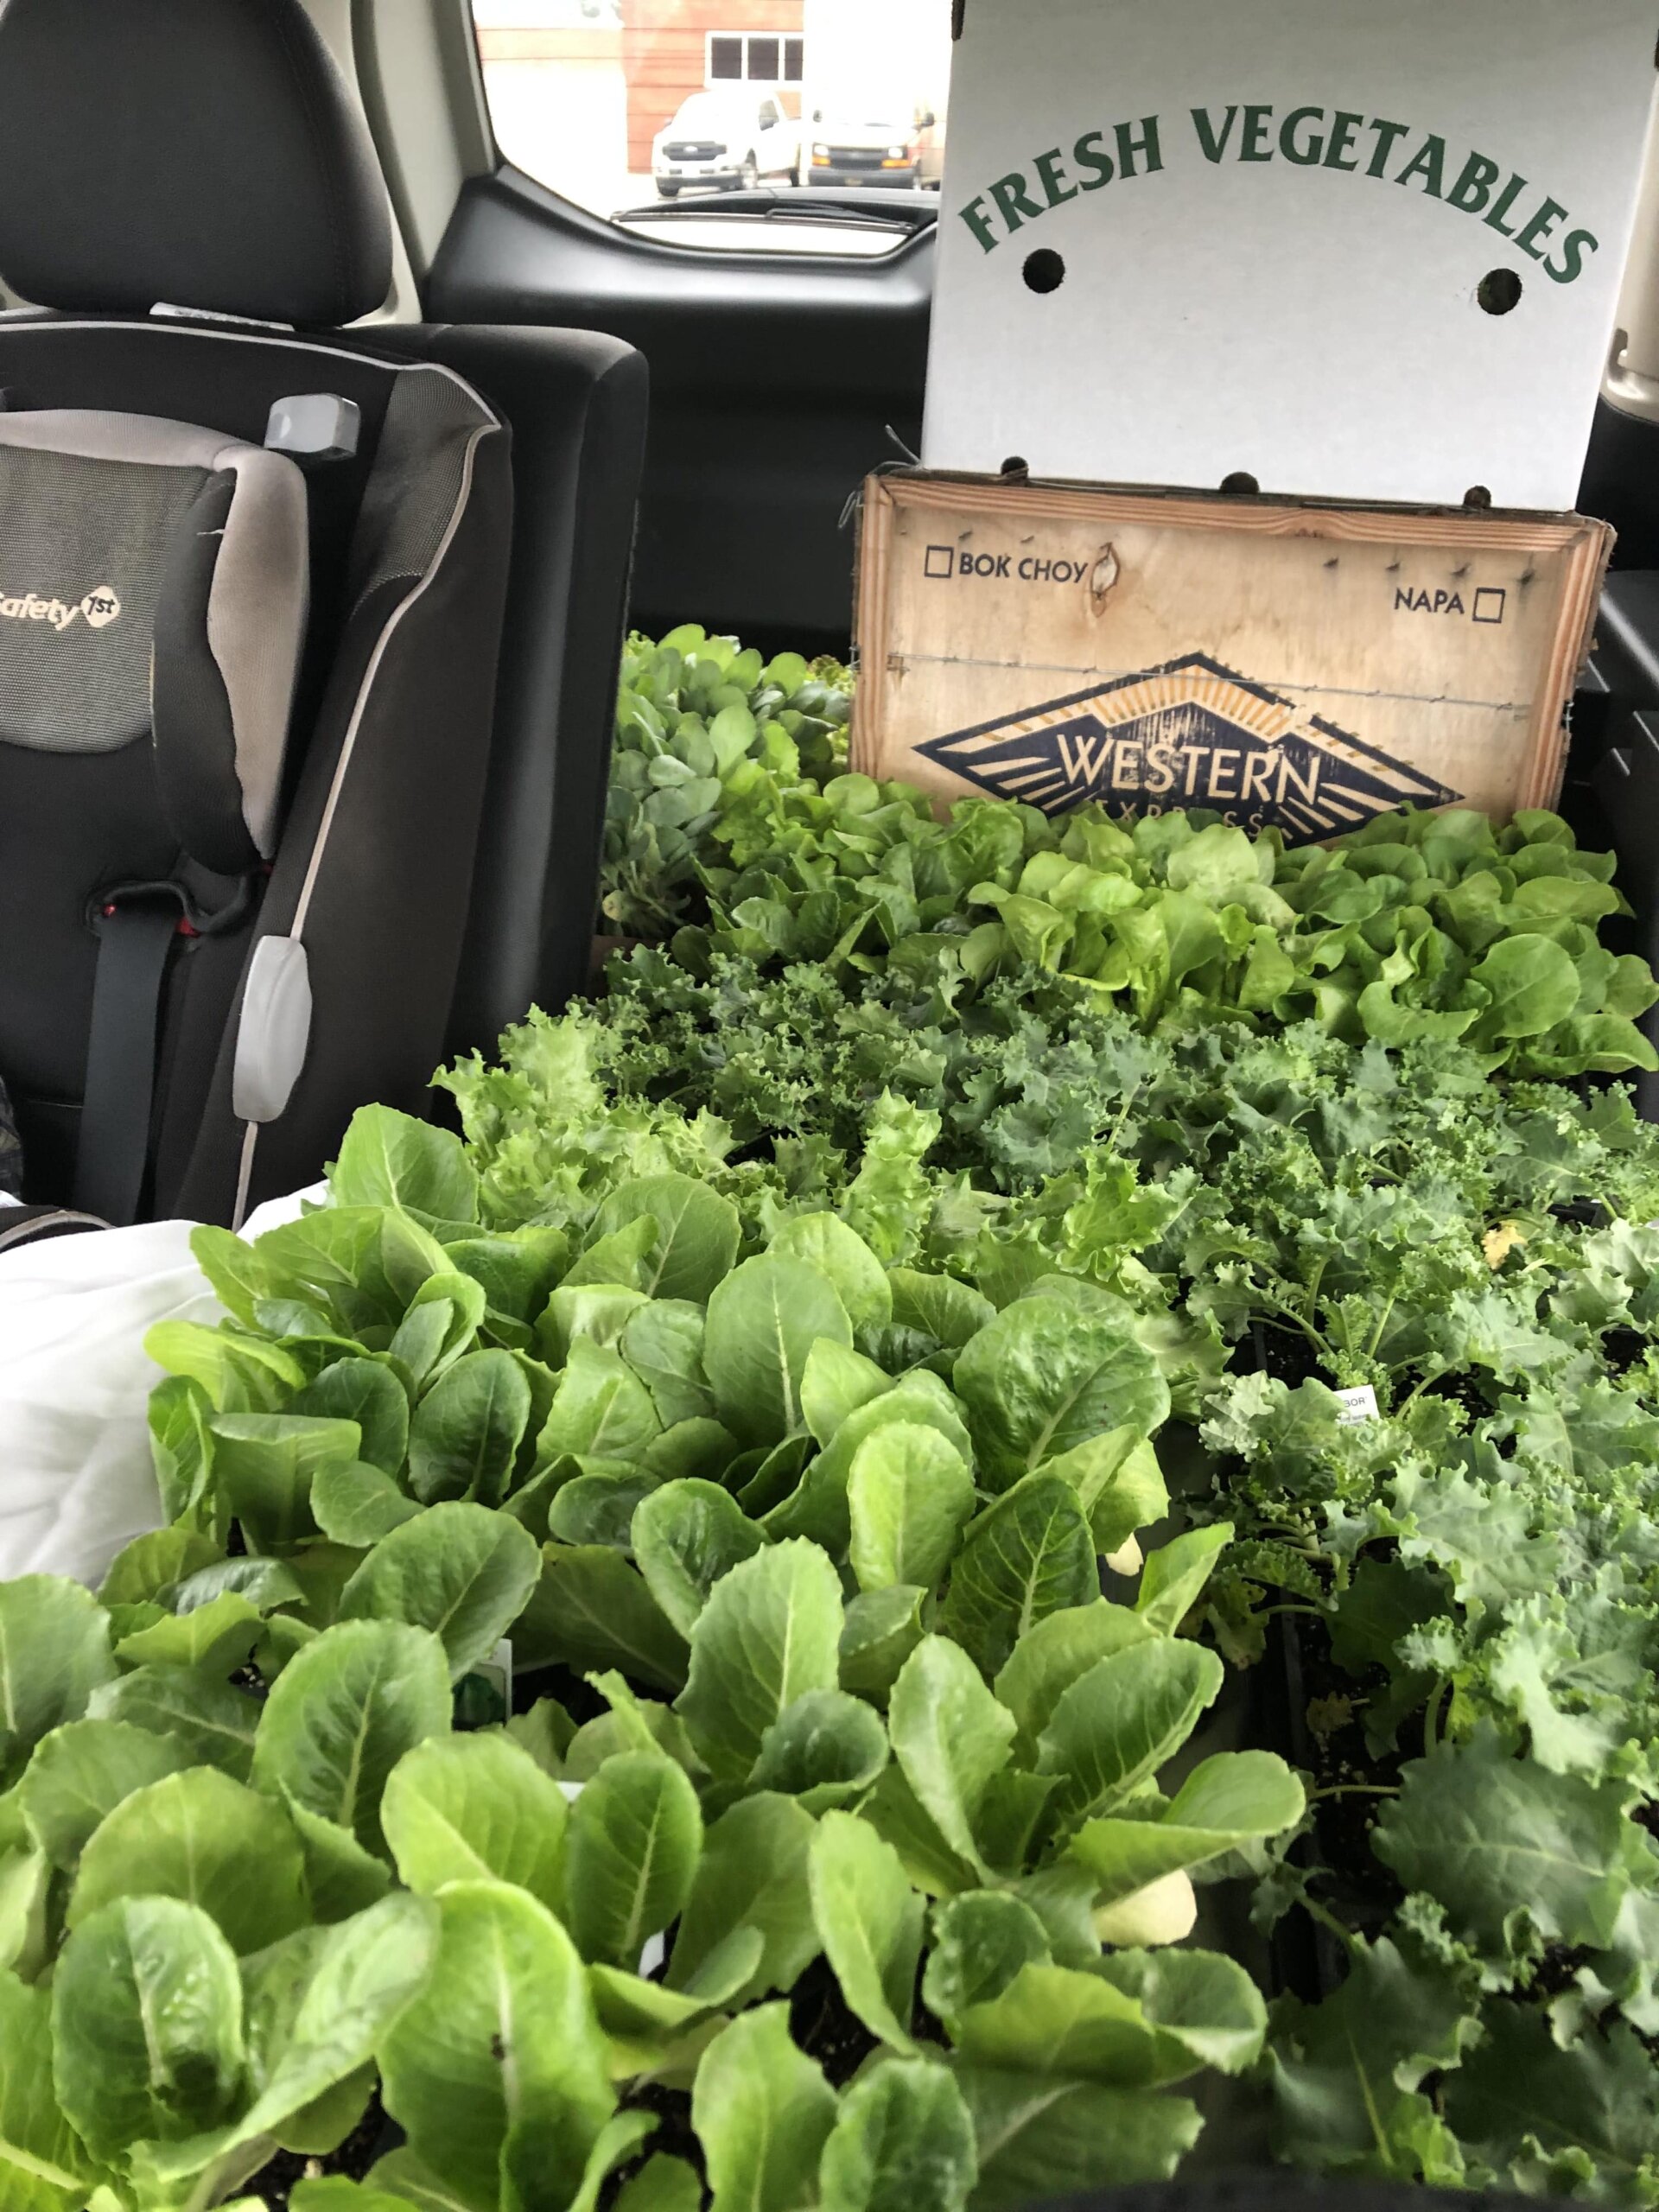 Trays of green plants in the back of a car